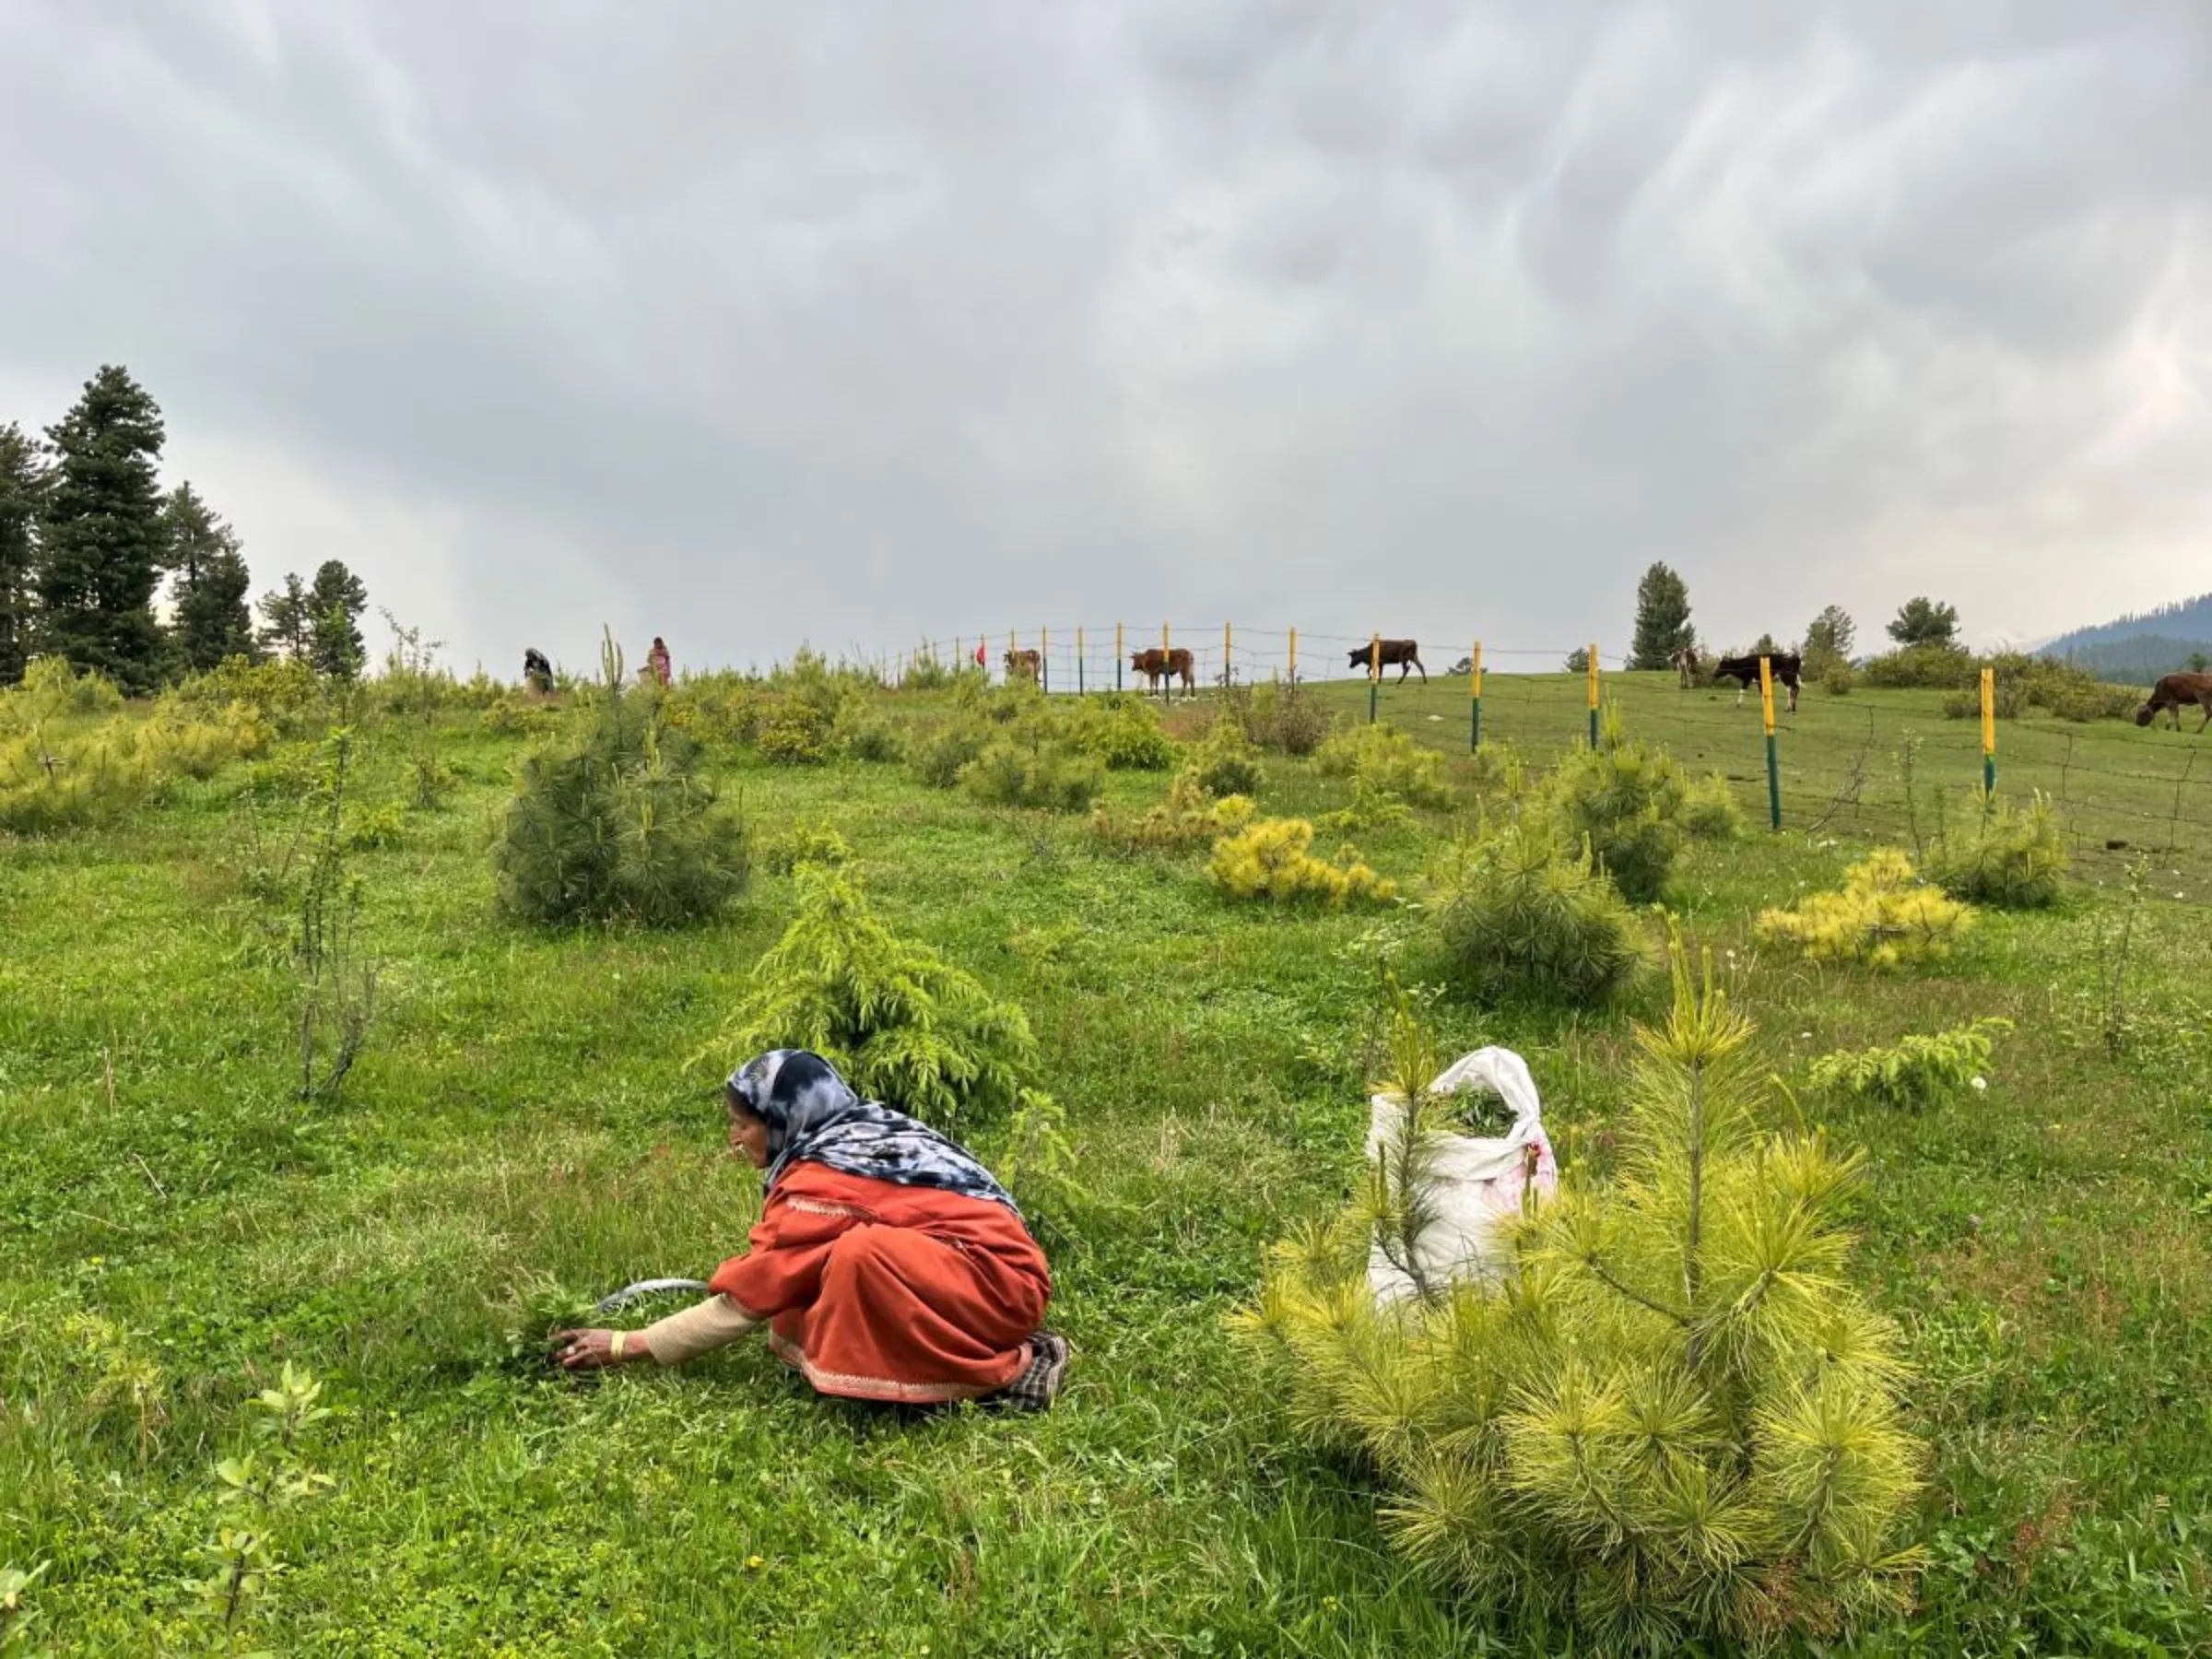 A woman works on a farm in Budgam, India, May 29, 2022